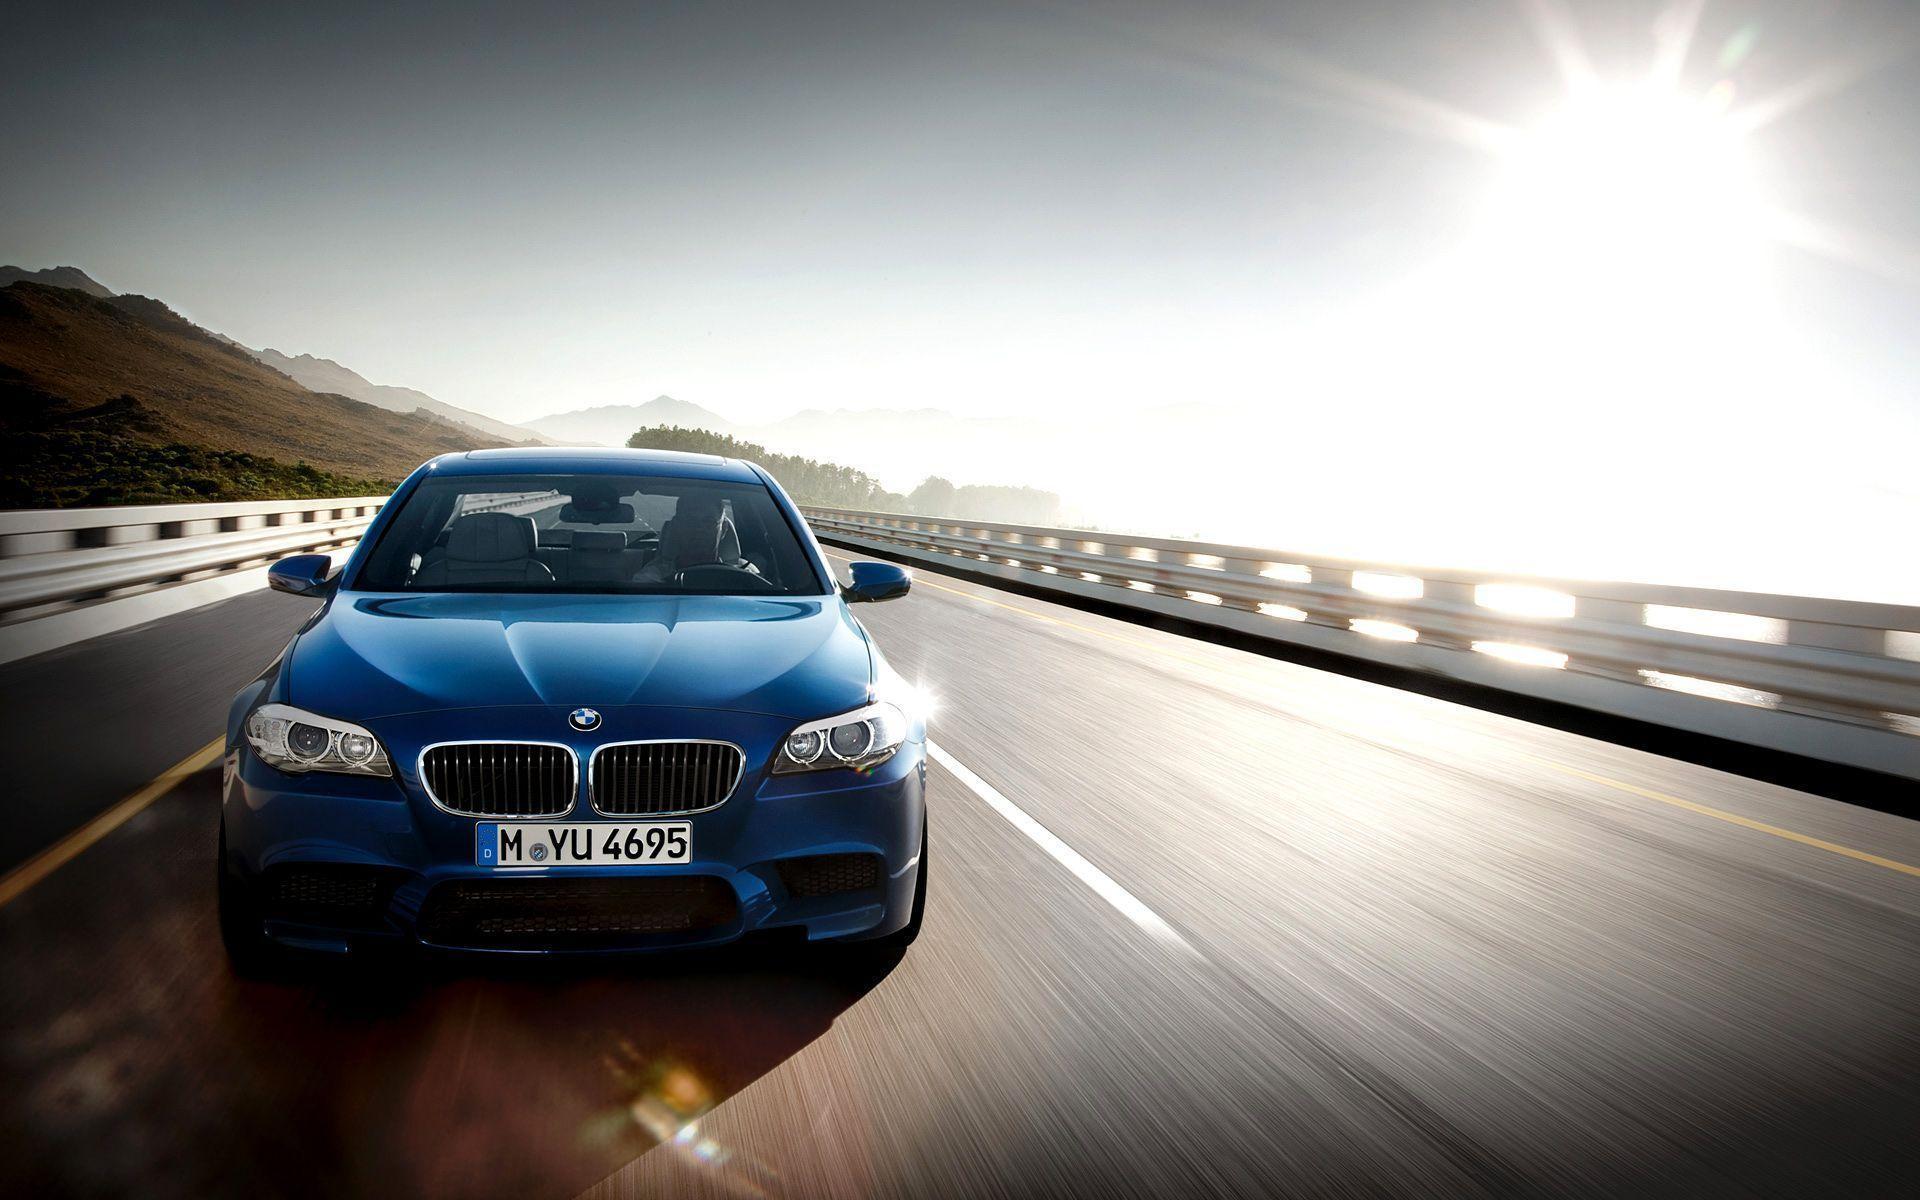 Your Batch of BMW M5 LCI Wallpaper Is Here